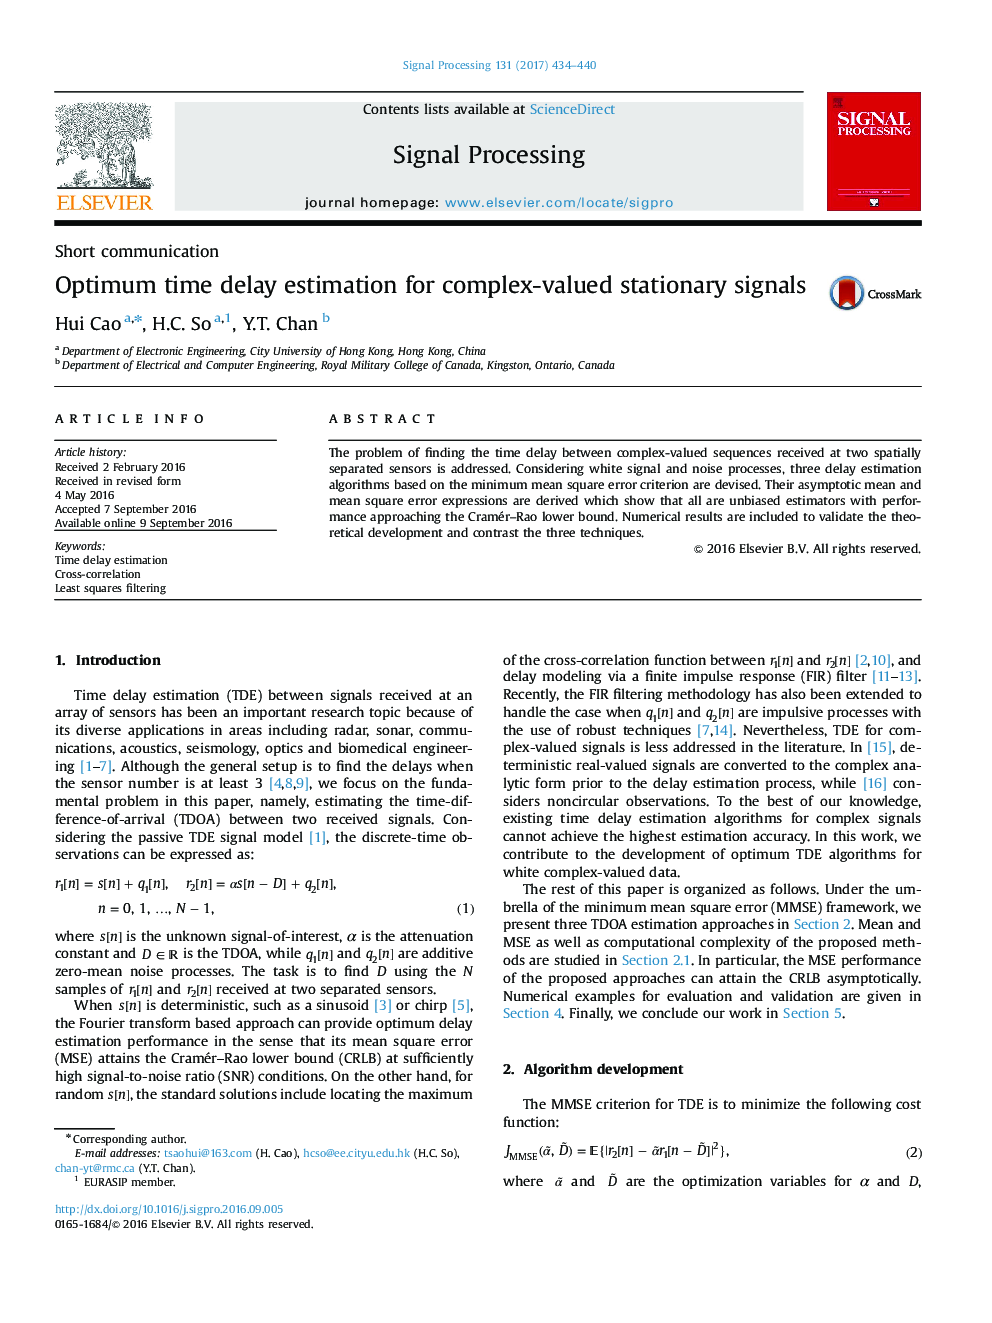 Optimum time delay estimation for complex-valued stationary signals